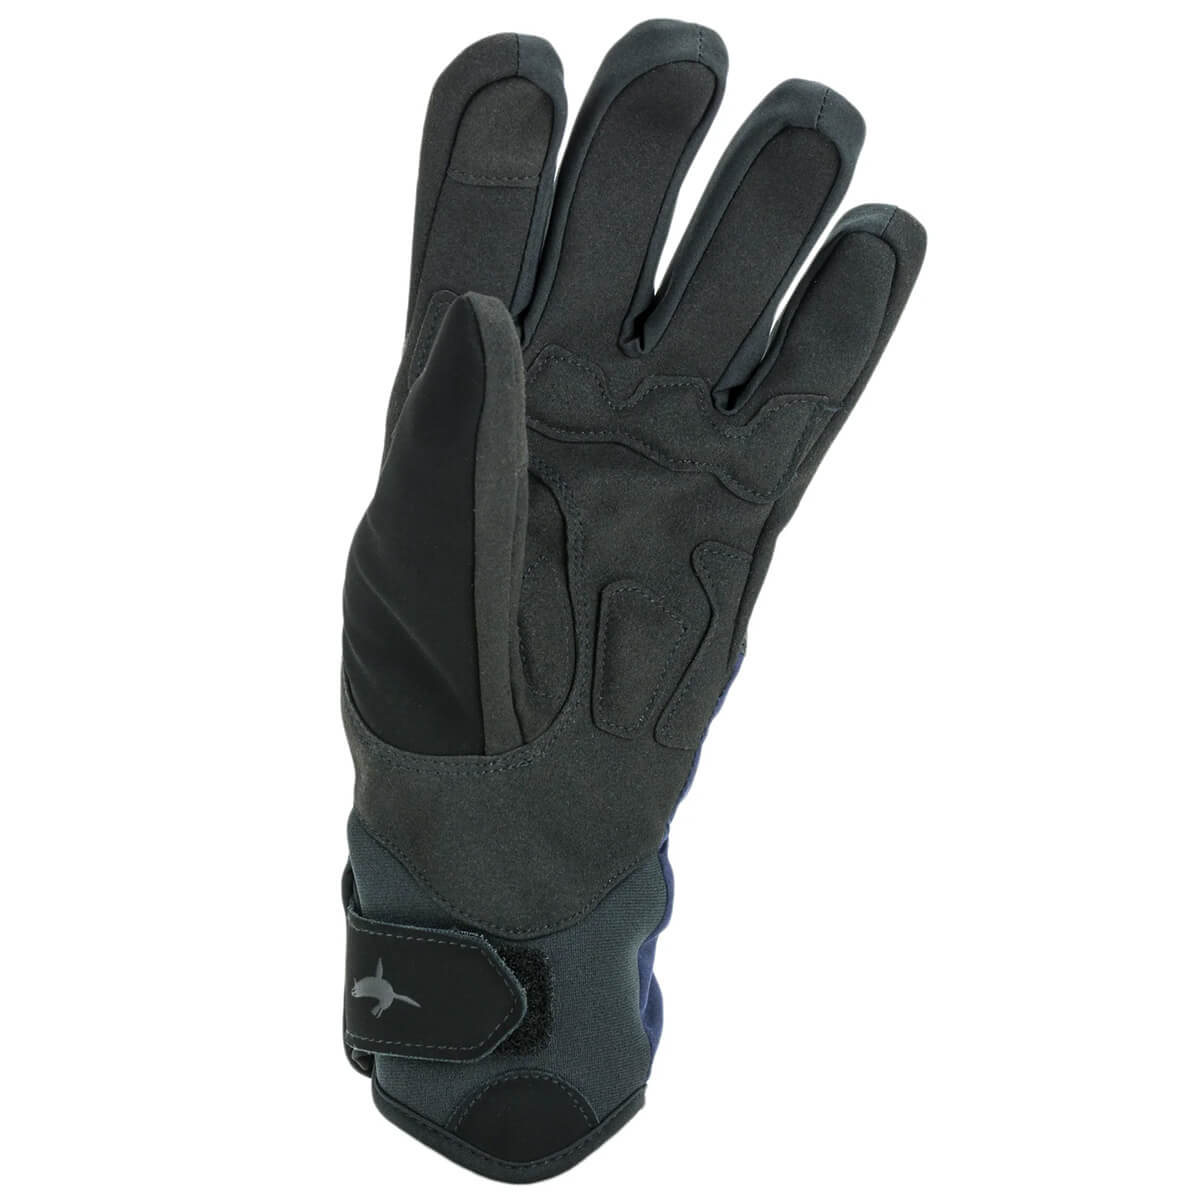 Sealskinz Waterproof All Weather Cycle Gloves - John Bull Clothing